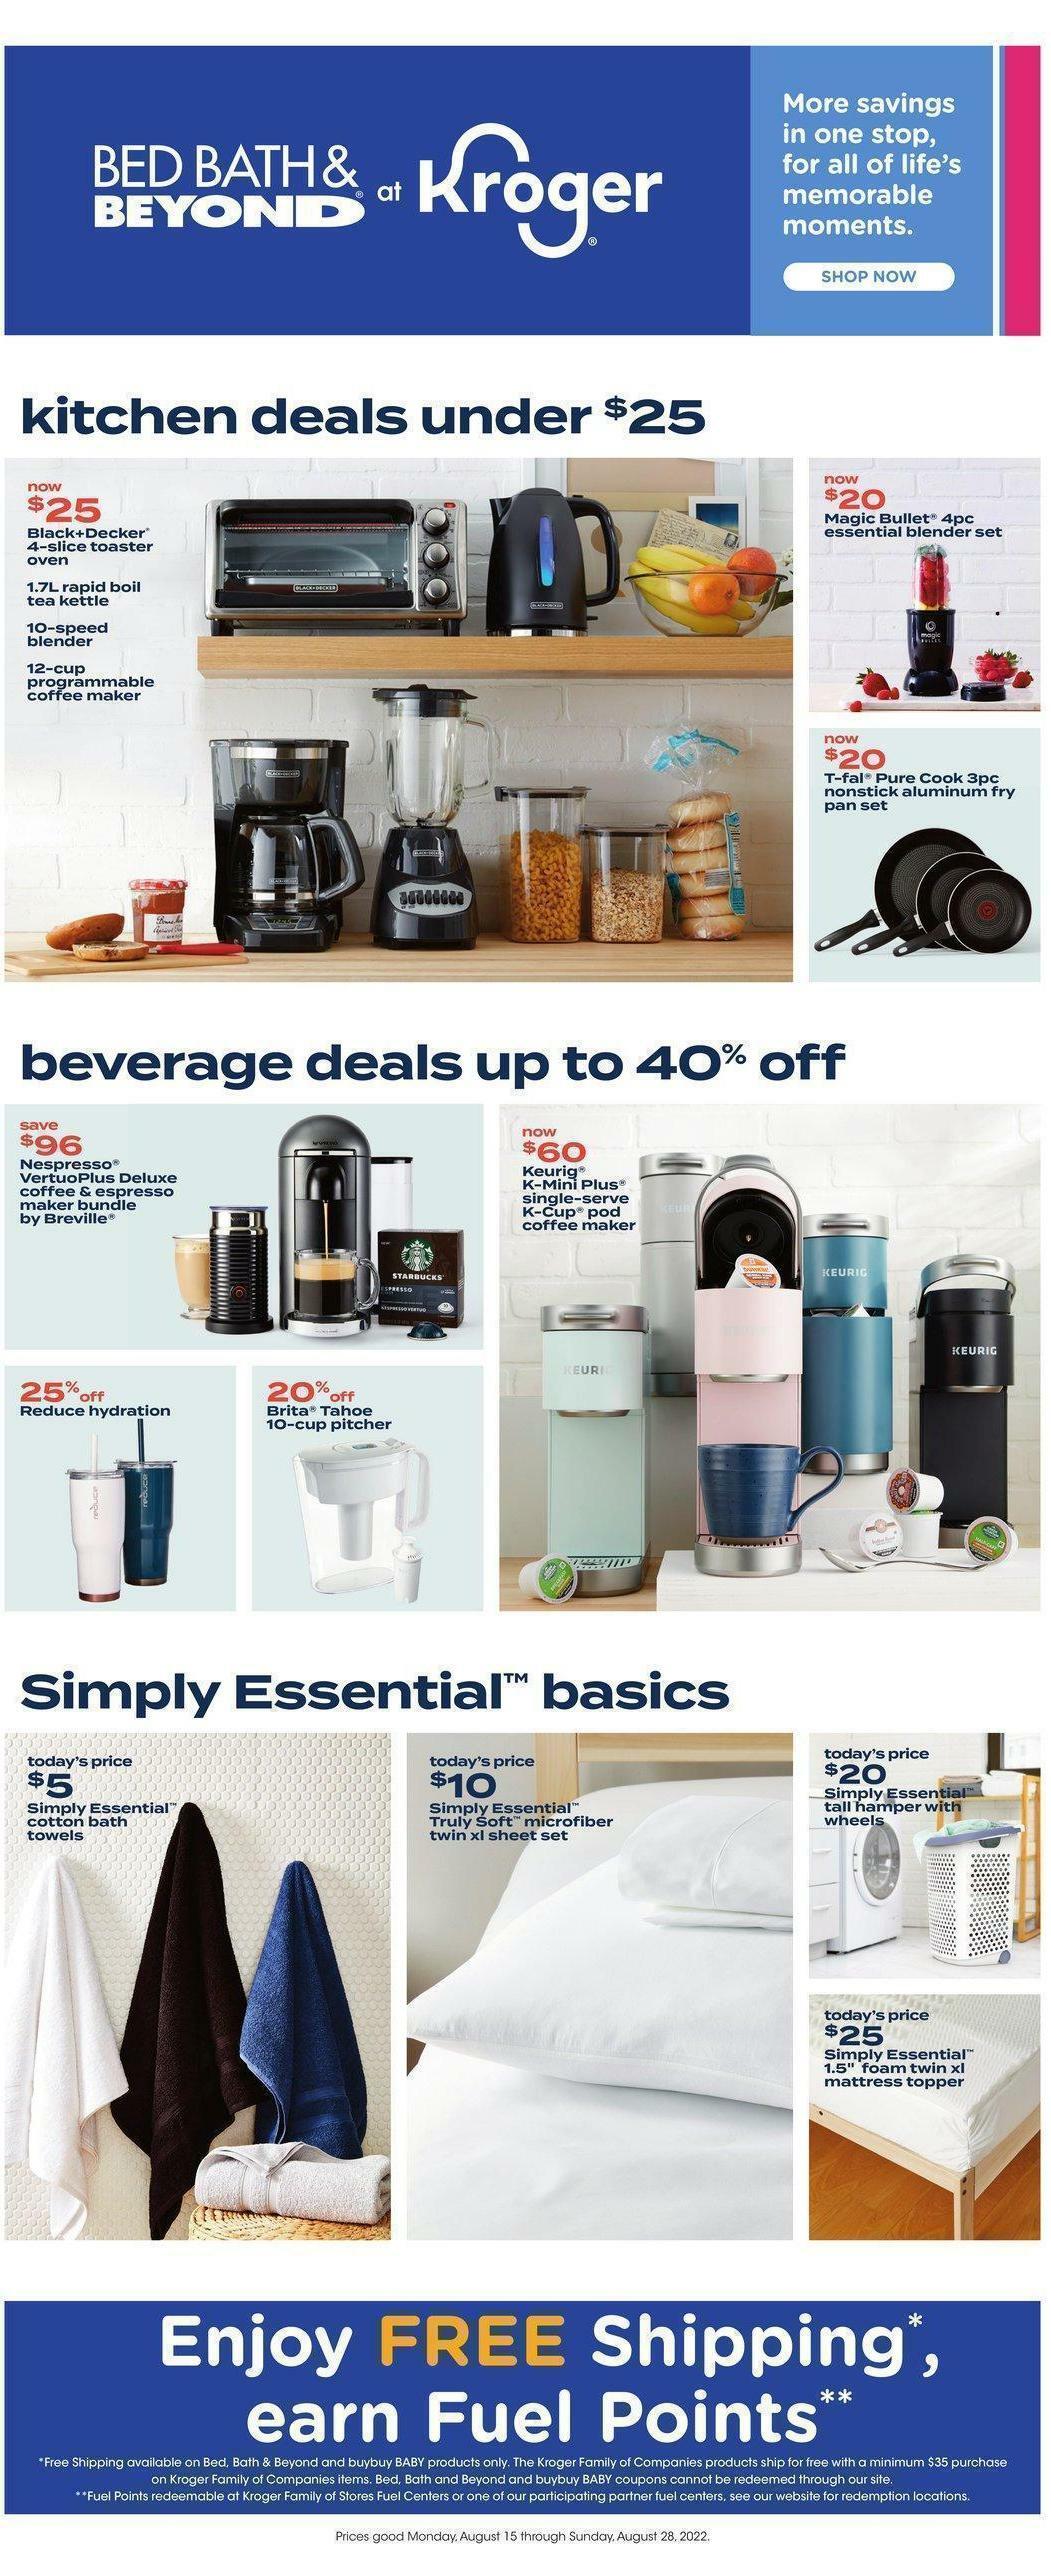 Kroger Bed, Bath & Beyond Weekly Ad from August 15